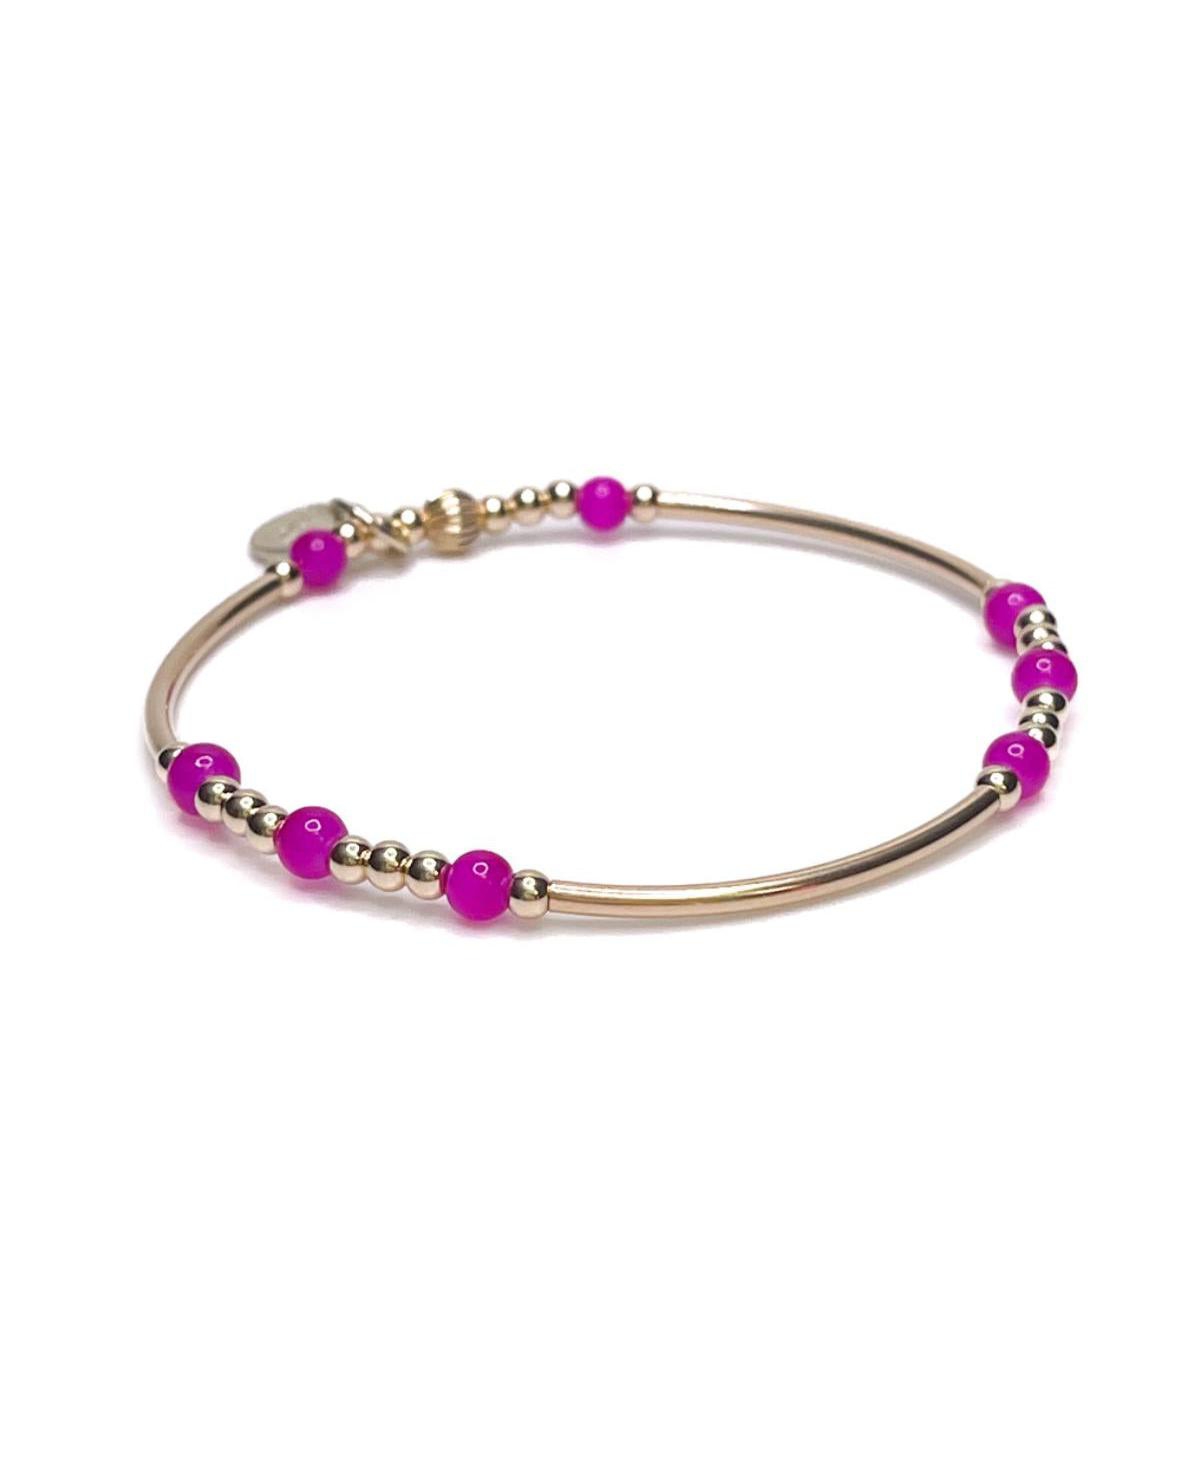 Non-Tarnishing Gold filled, 3mm Gold Ball , Gold Tube Stretch Bracelet & Colorful Pink Glass Beads - Gold  pink